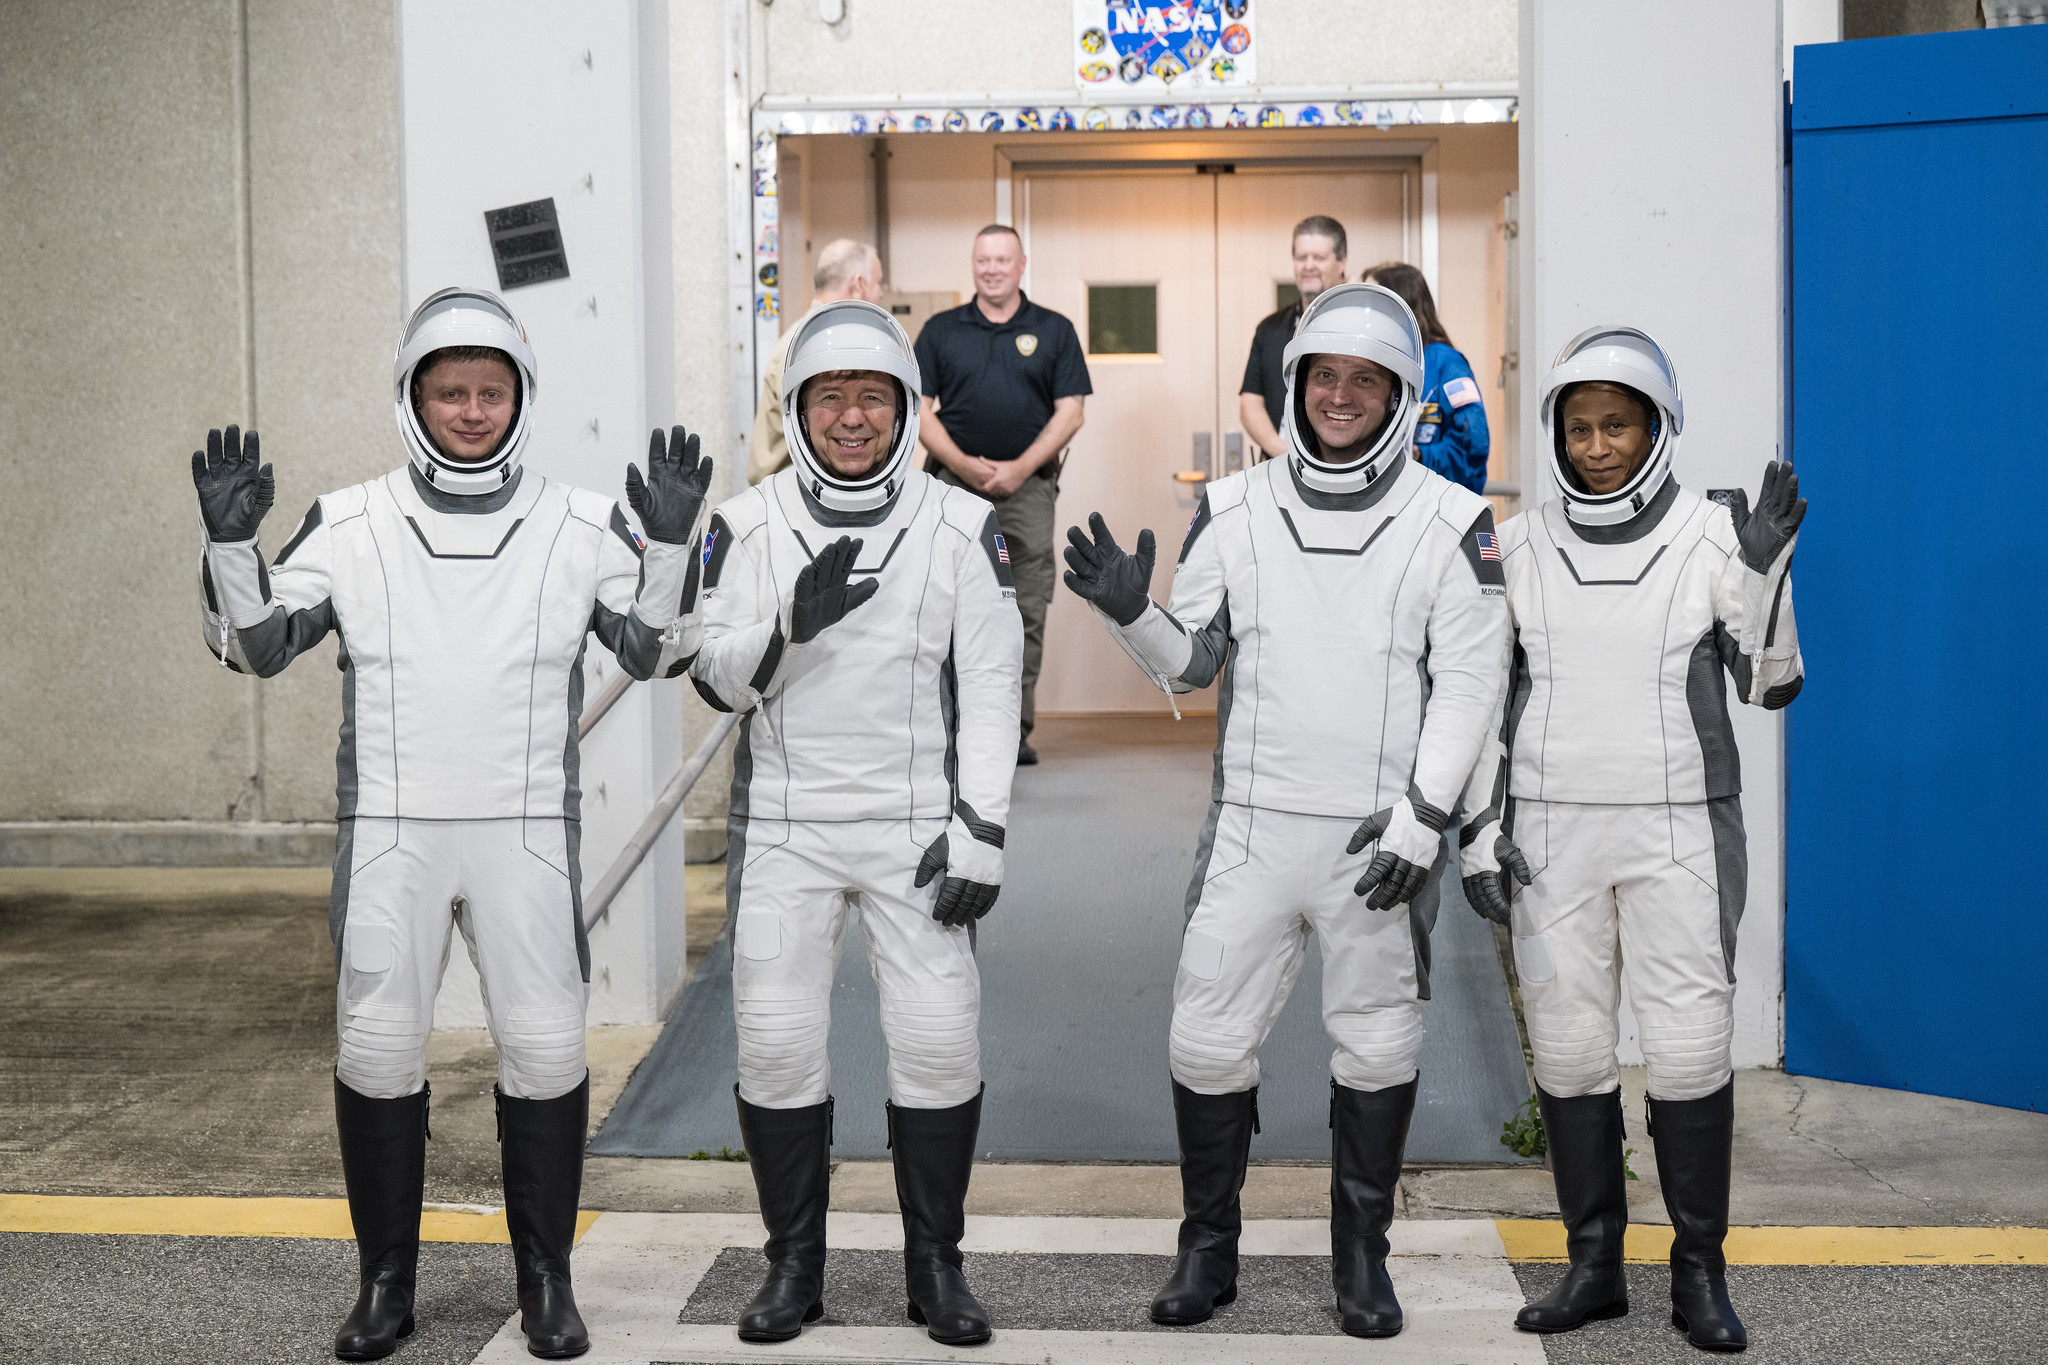 From left to right, Roscosmos cosmonaut Alexander Grebenkin, and NASA astronauts Michael Barratt, Matthew Dominick, and Jeanette Epps, wearing SpaceX spacesuits, are seen as they prepare to depart the Neil A. Armstrong Operations and Checkout Building for Launch Complex 39A during a dress rehearsal prior to the Crew-8 mission launch, Monday, Feb. 26, 2024, at NASA’s Kennedy Space Center in Florida.